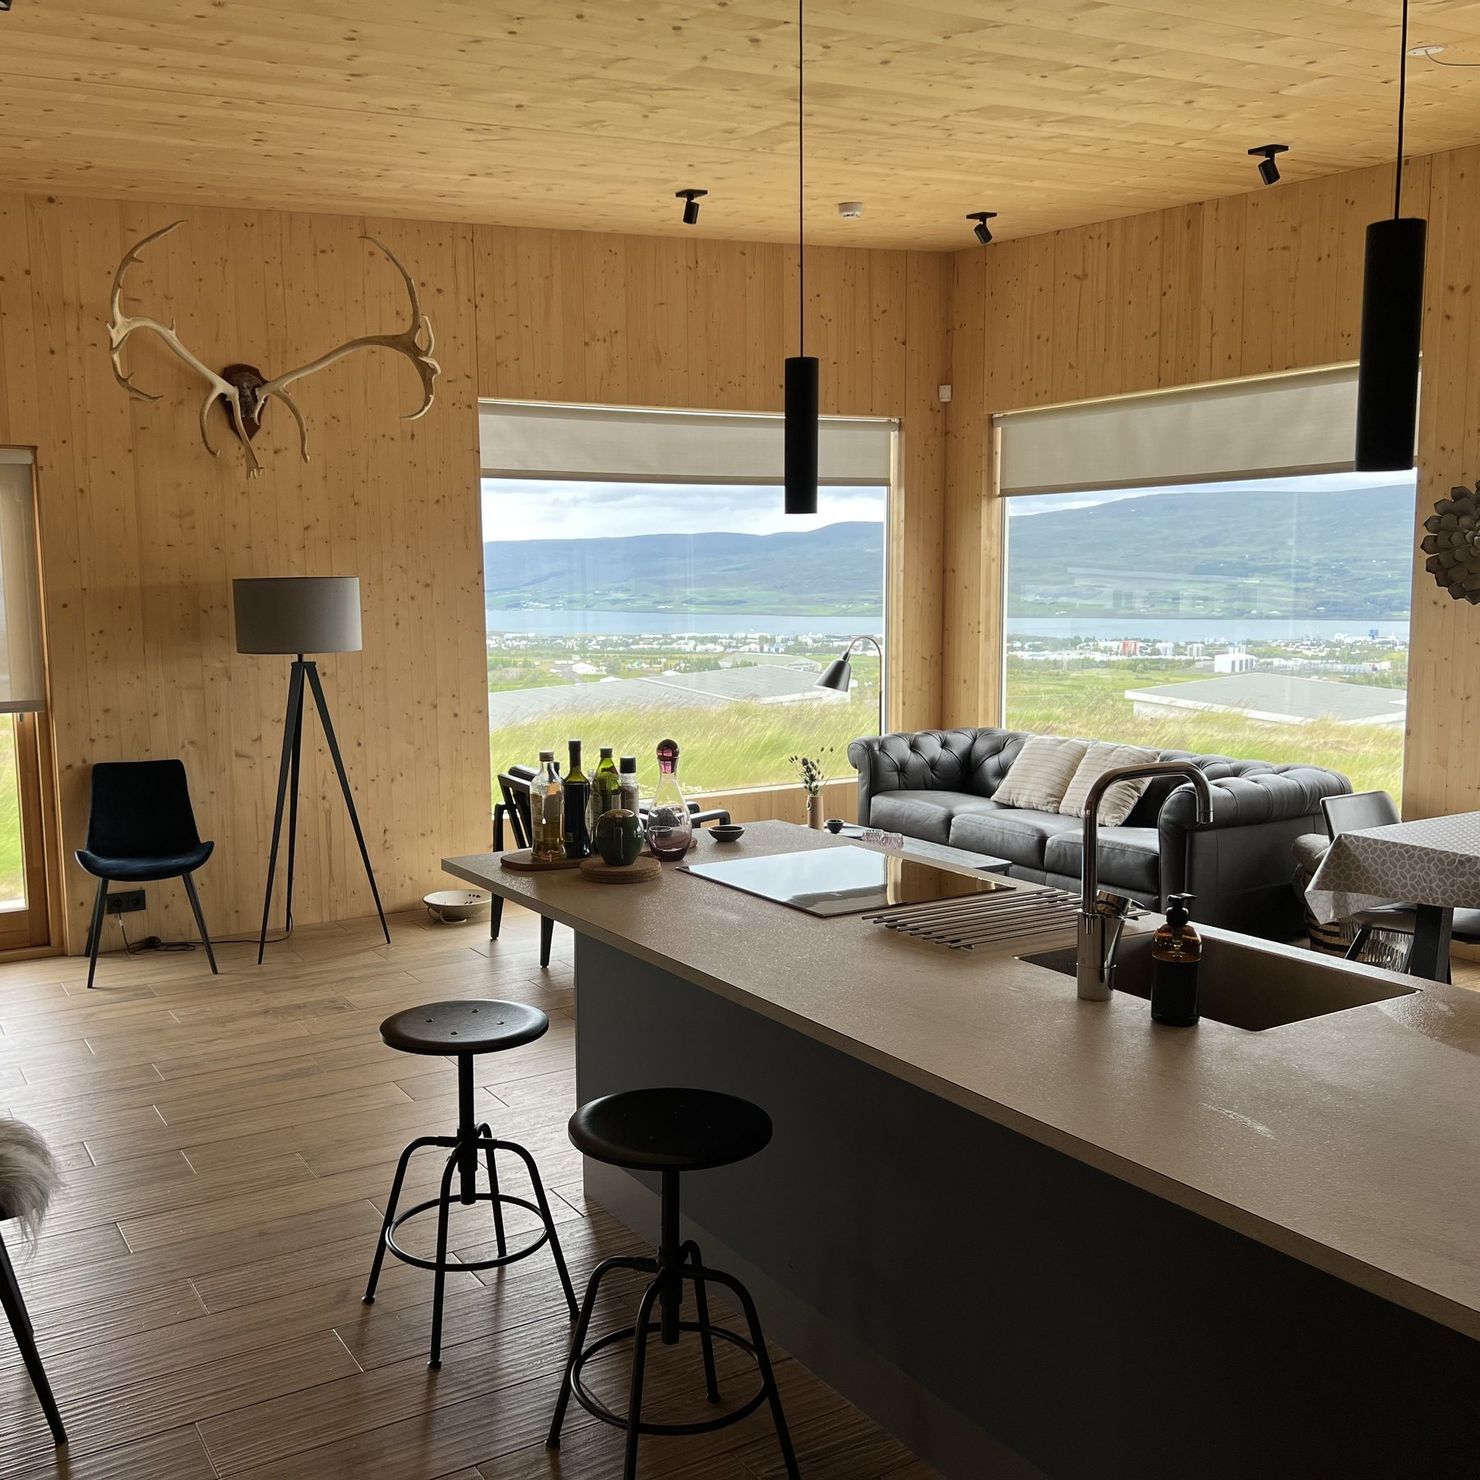 From the stylishly furnished kitchen-living room you have an excellent view of Eyjafjörður